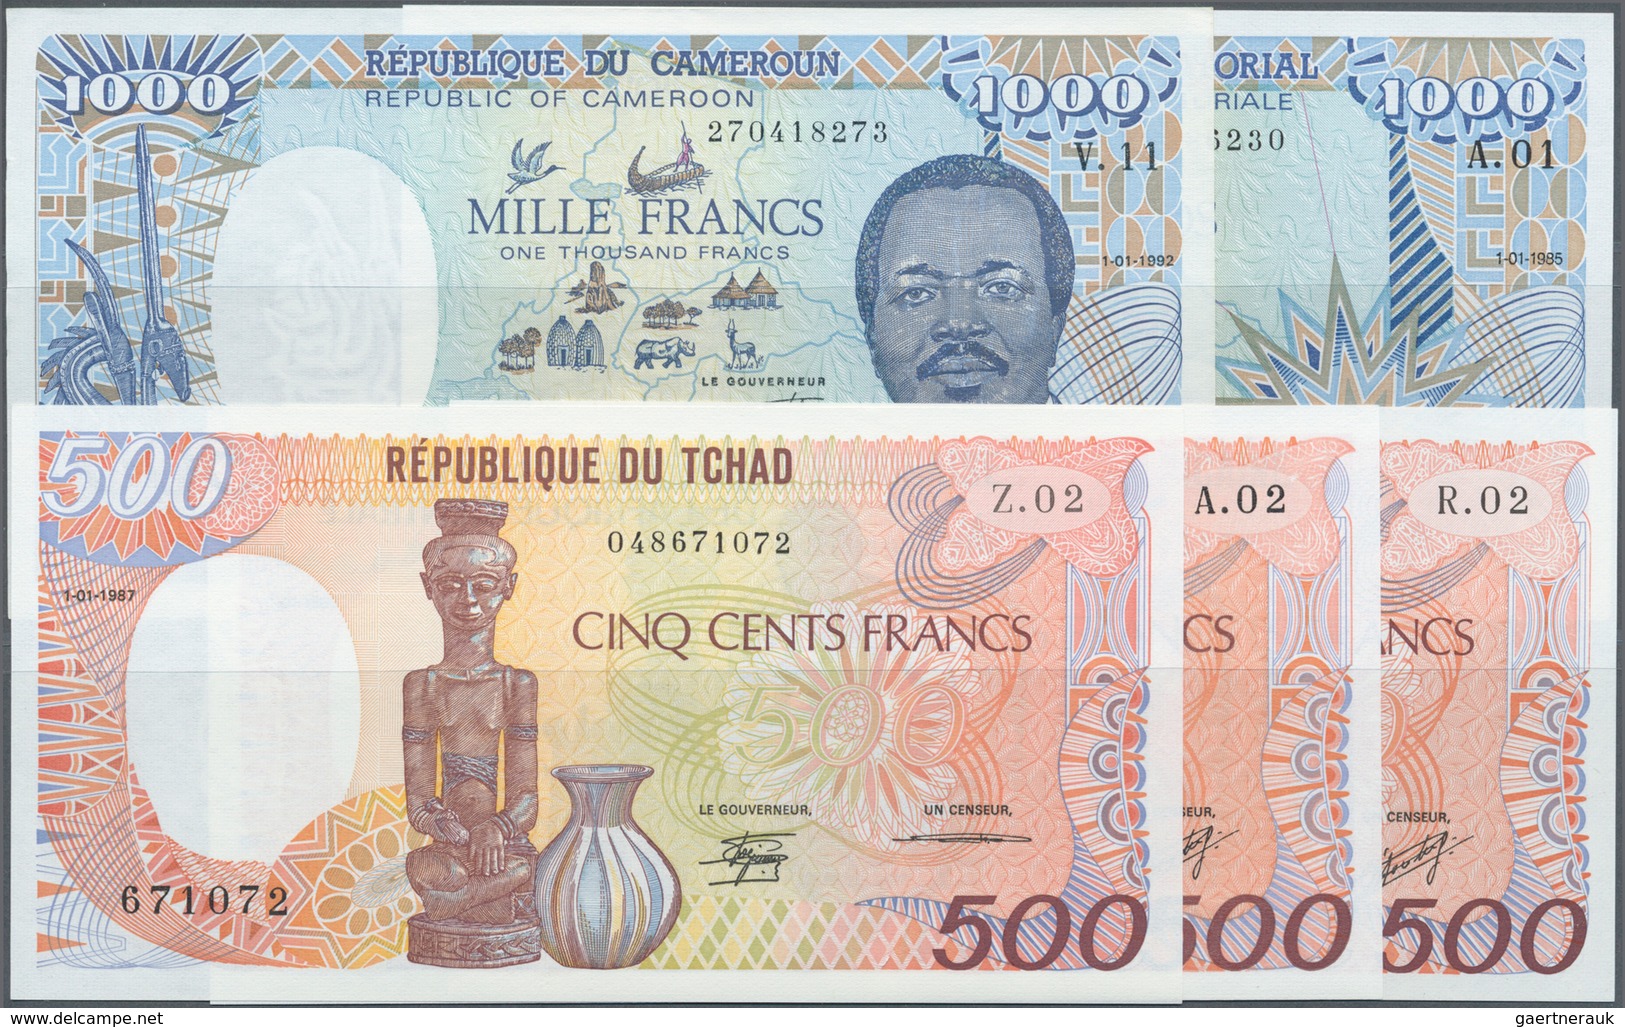 Africa / Afrika: Interesting Set Of 5 African Banknotes Containing Central African Republic 500 Fran - Altri – Africa